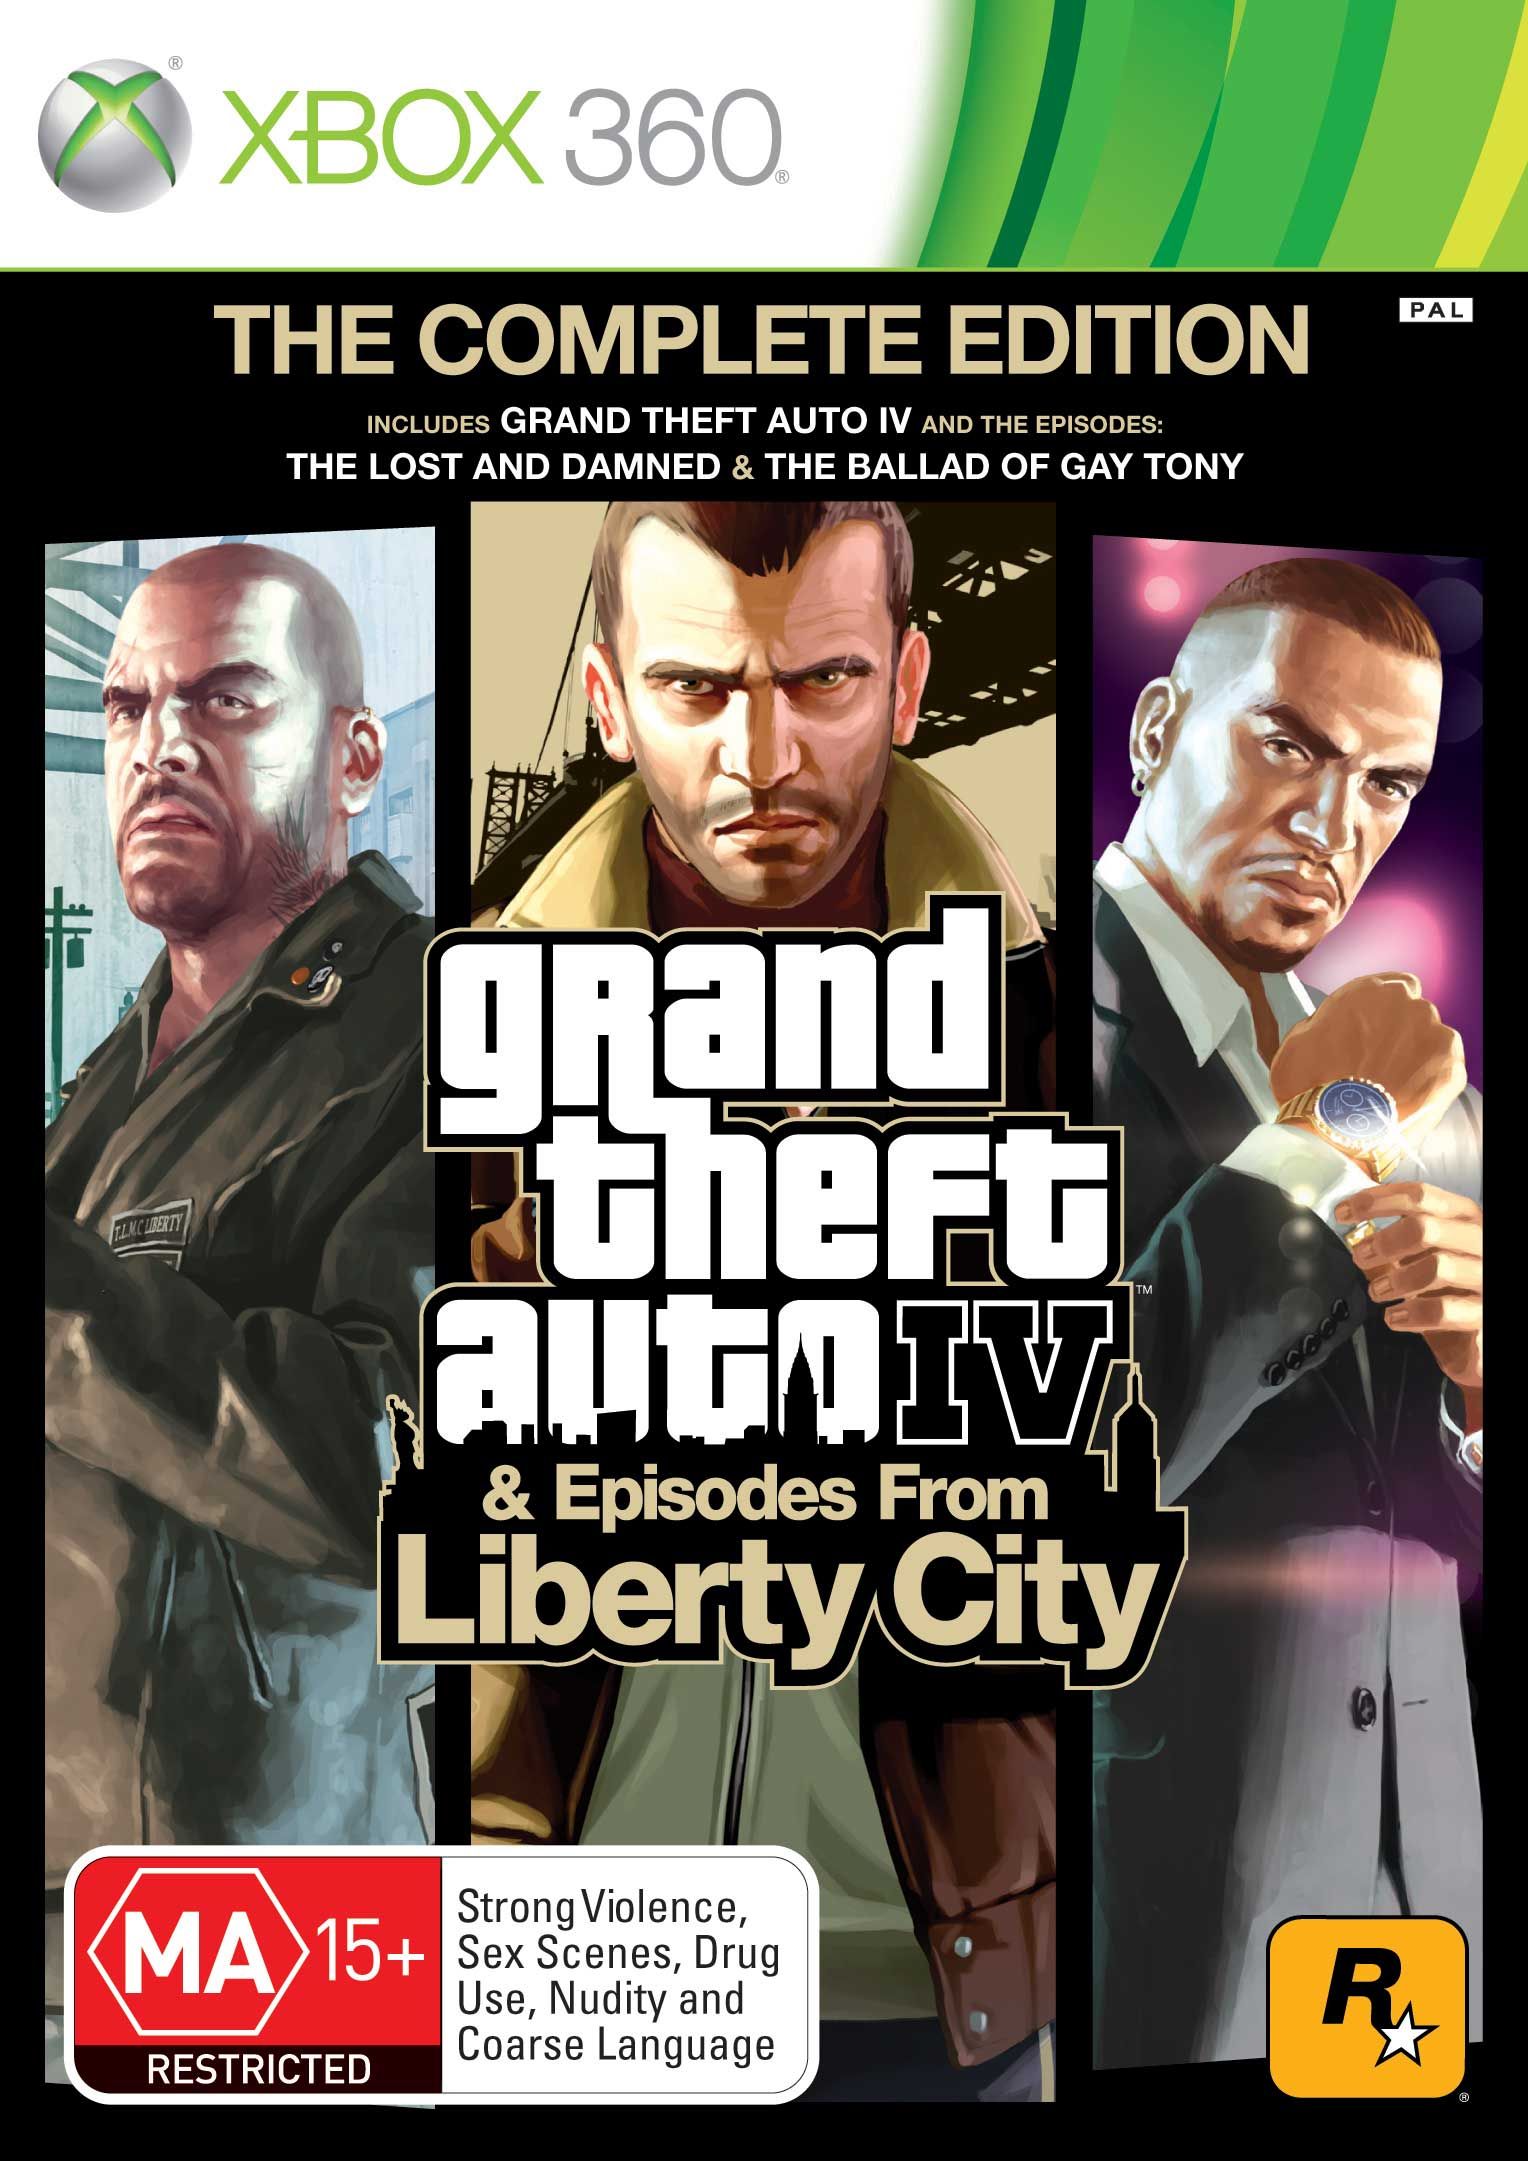 Game GTA Grand Theft Auto: Episodes From Liberty City - XBOX 360